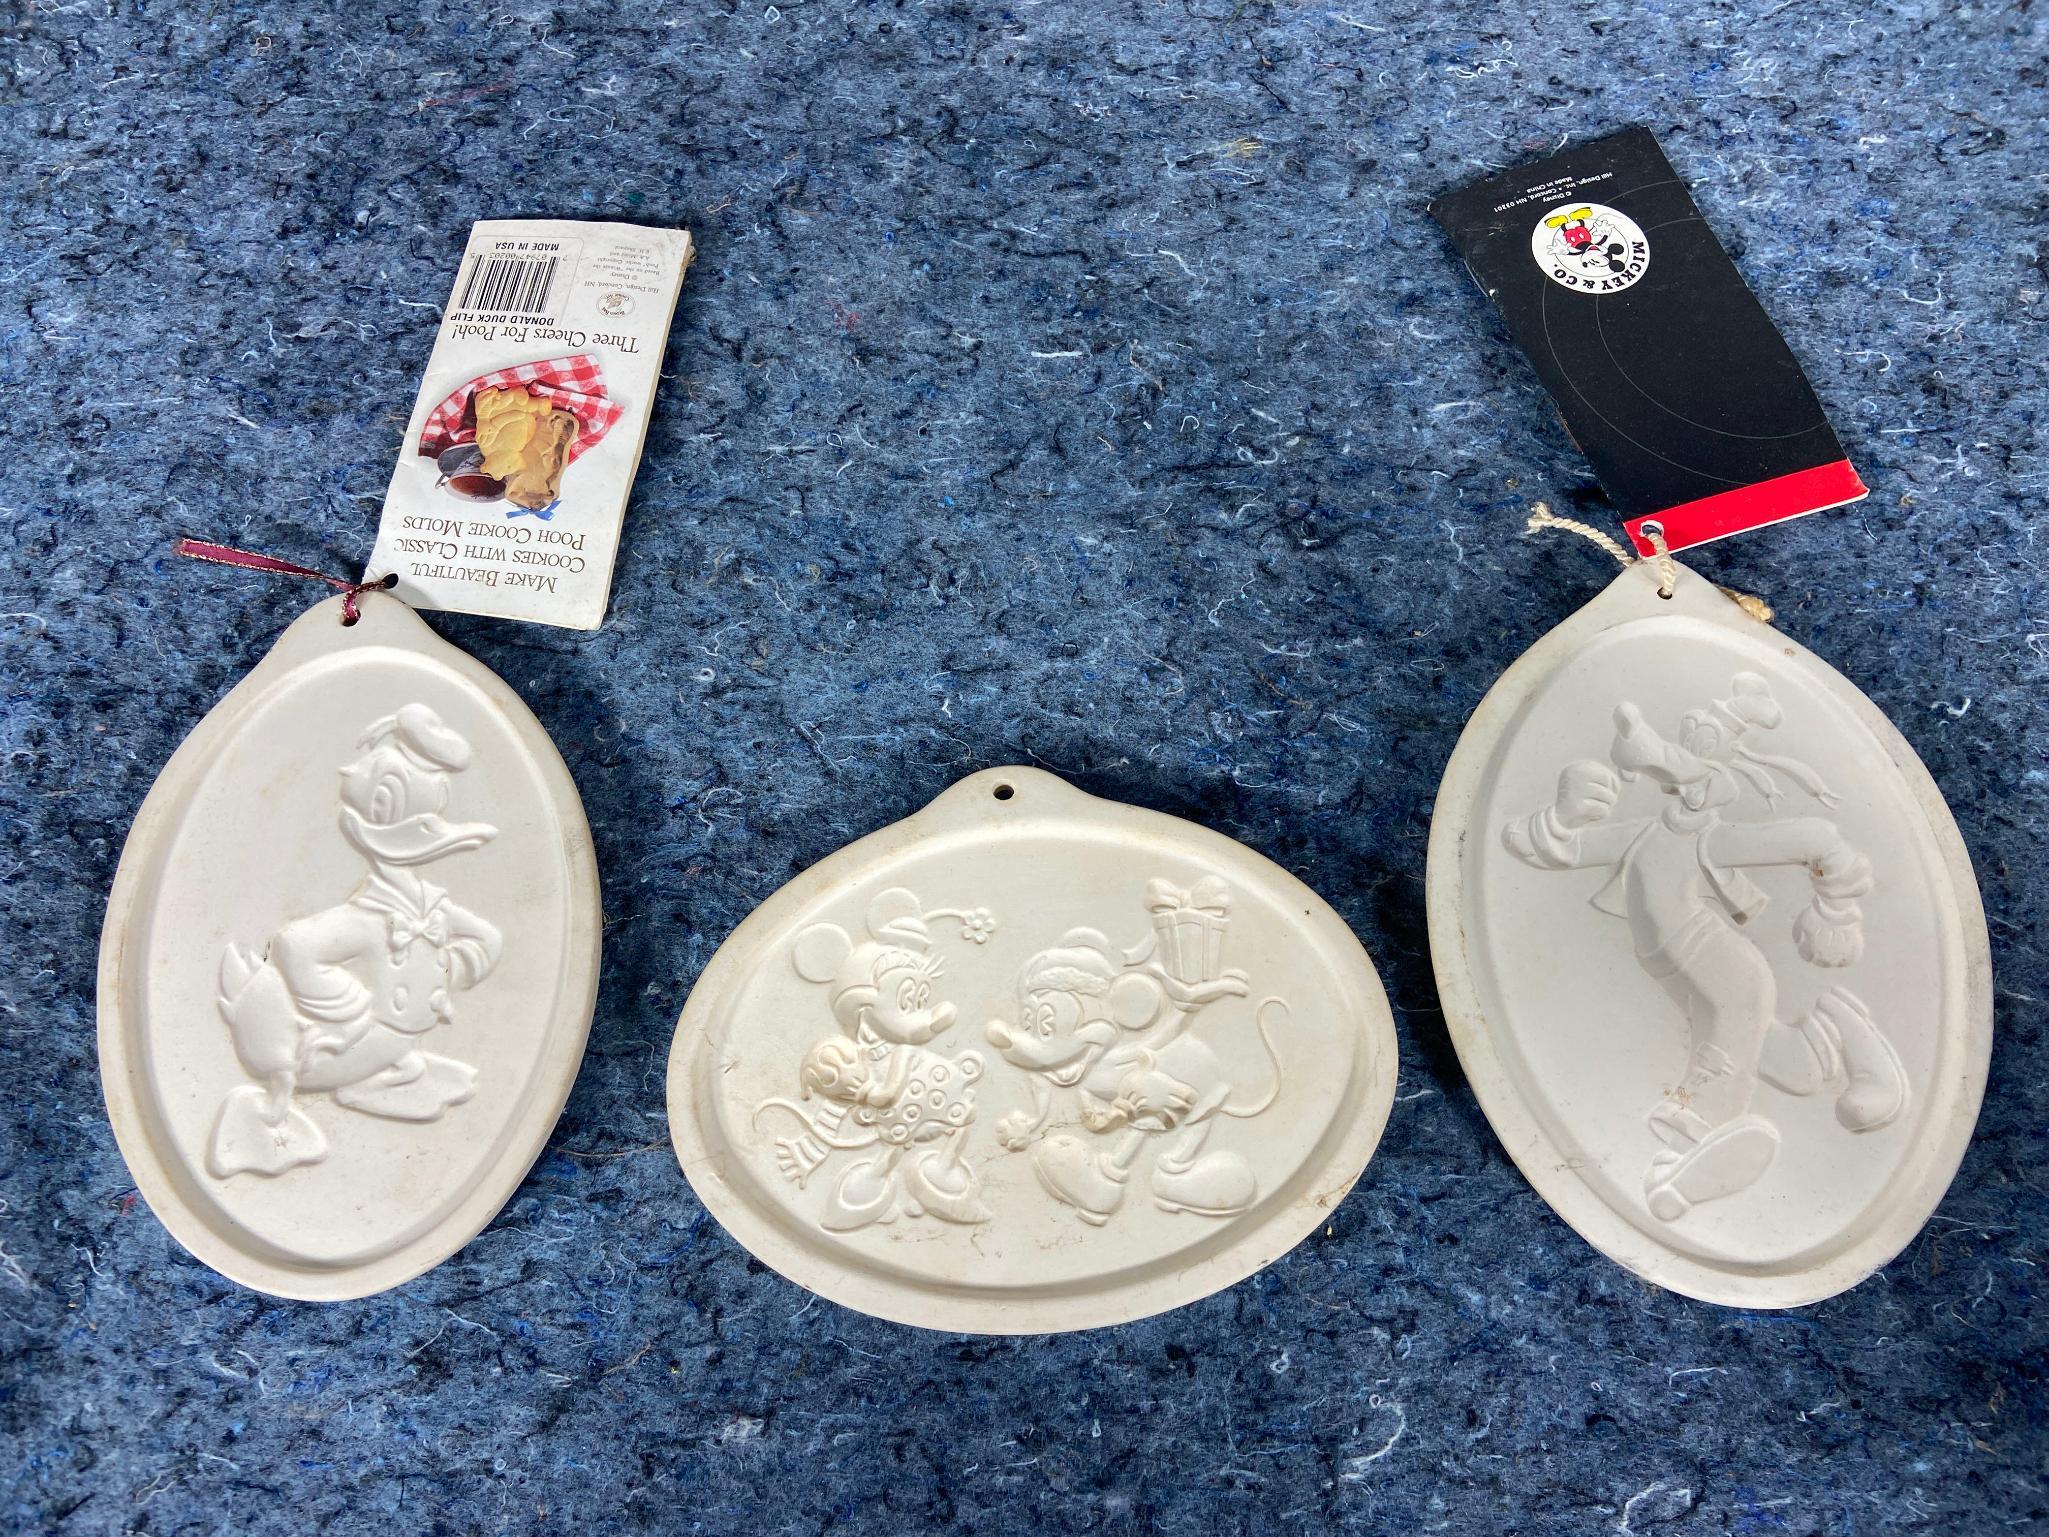 7 Vintage Cookie Molds including Mickey Mouse, Minnie Mouse, Donald Duck, Ohio State, and More